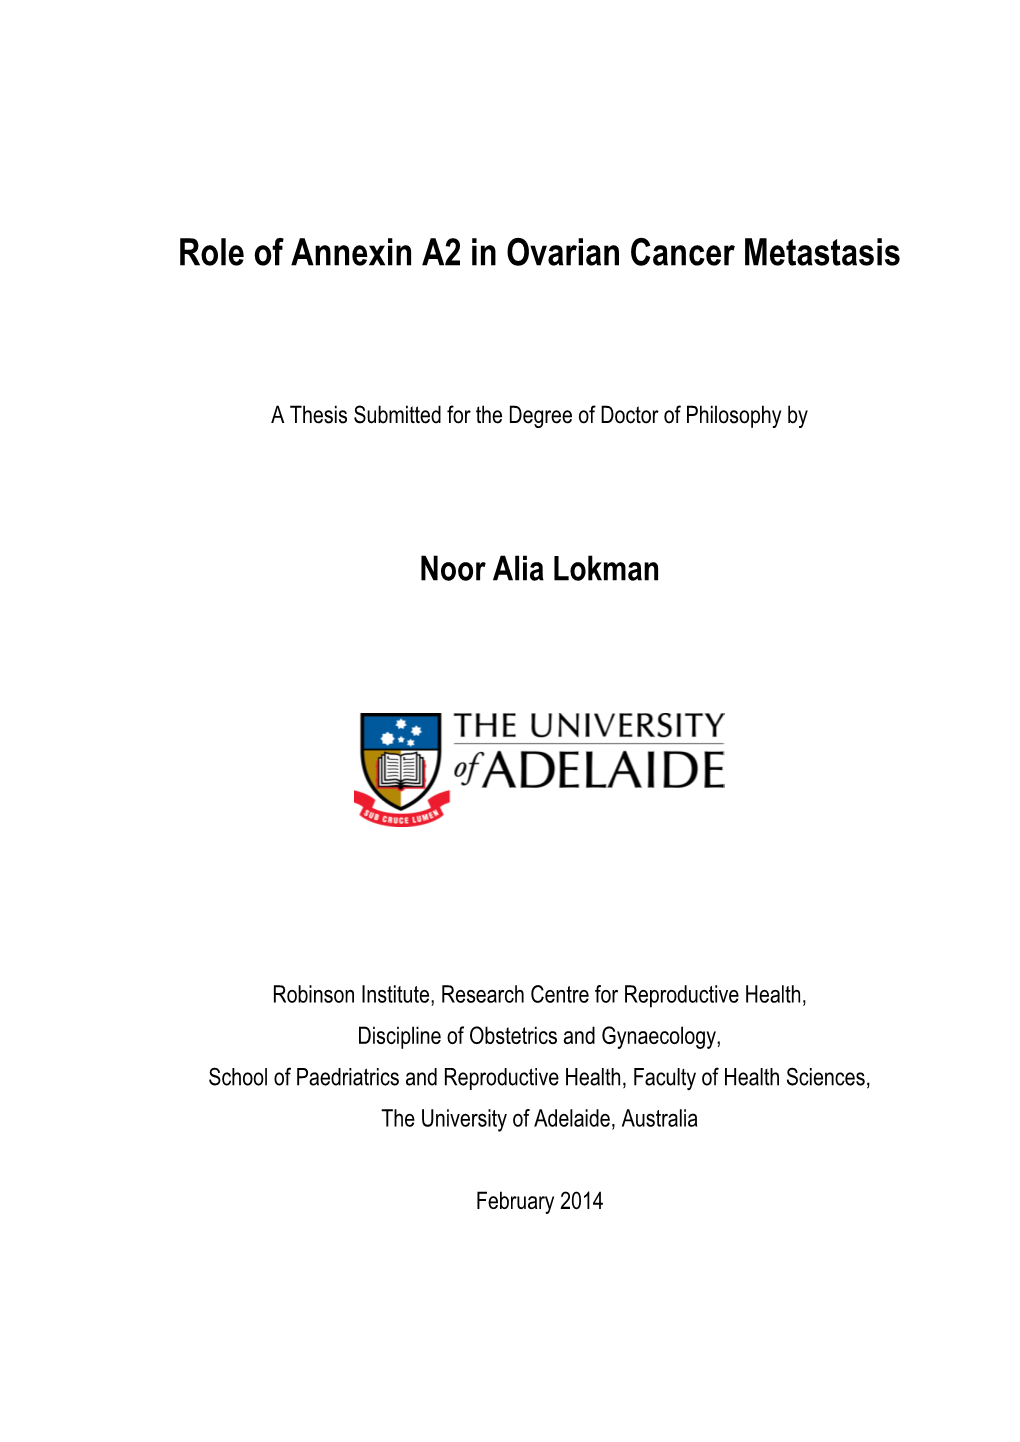 Role of Annexin A2 in Ovarian Cancer Metastasis